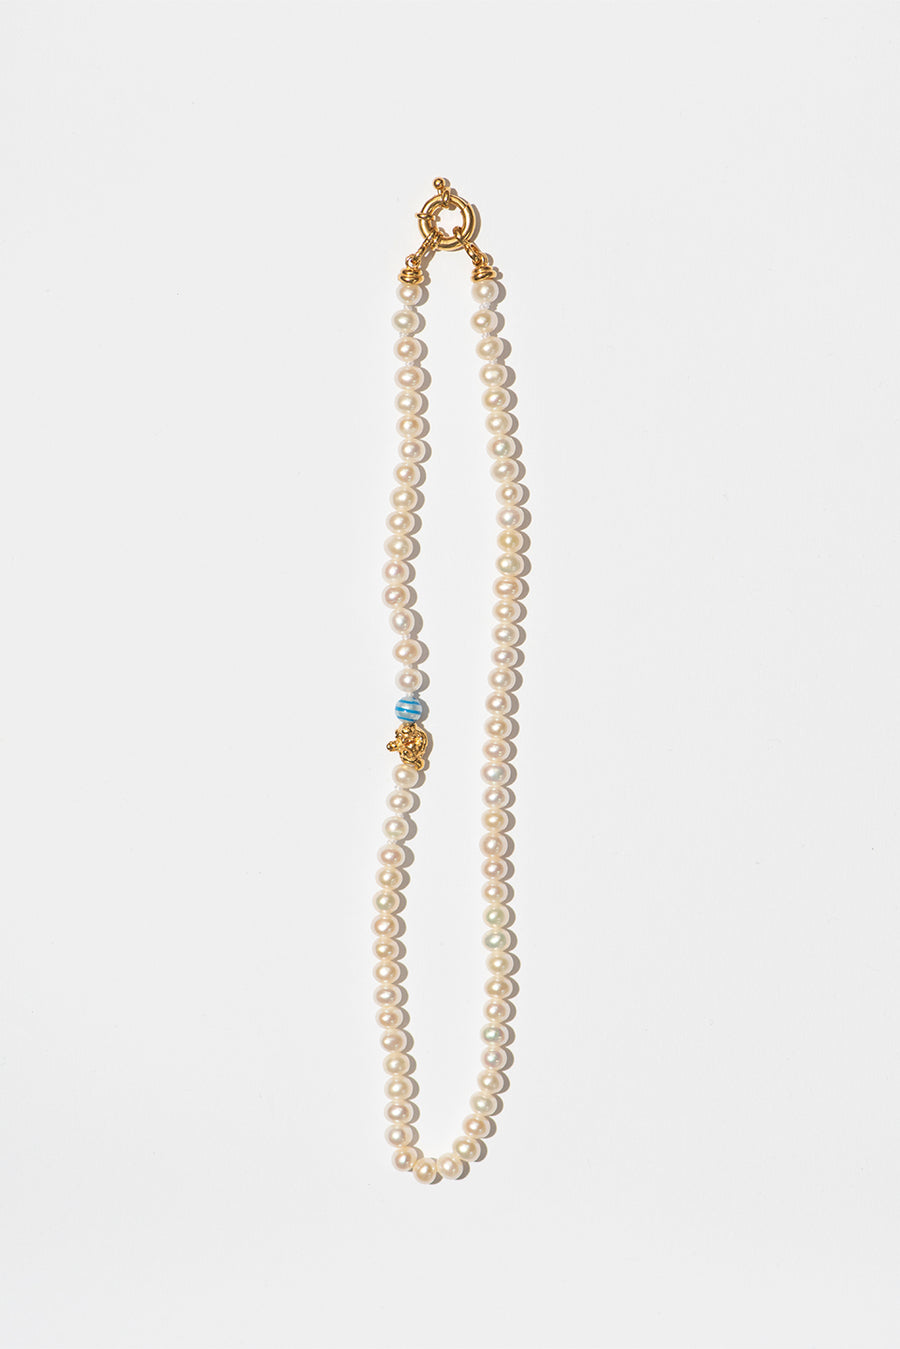 The Classic Pearl Necklace Blue Stripes - Small